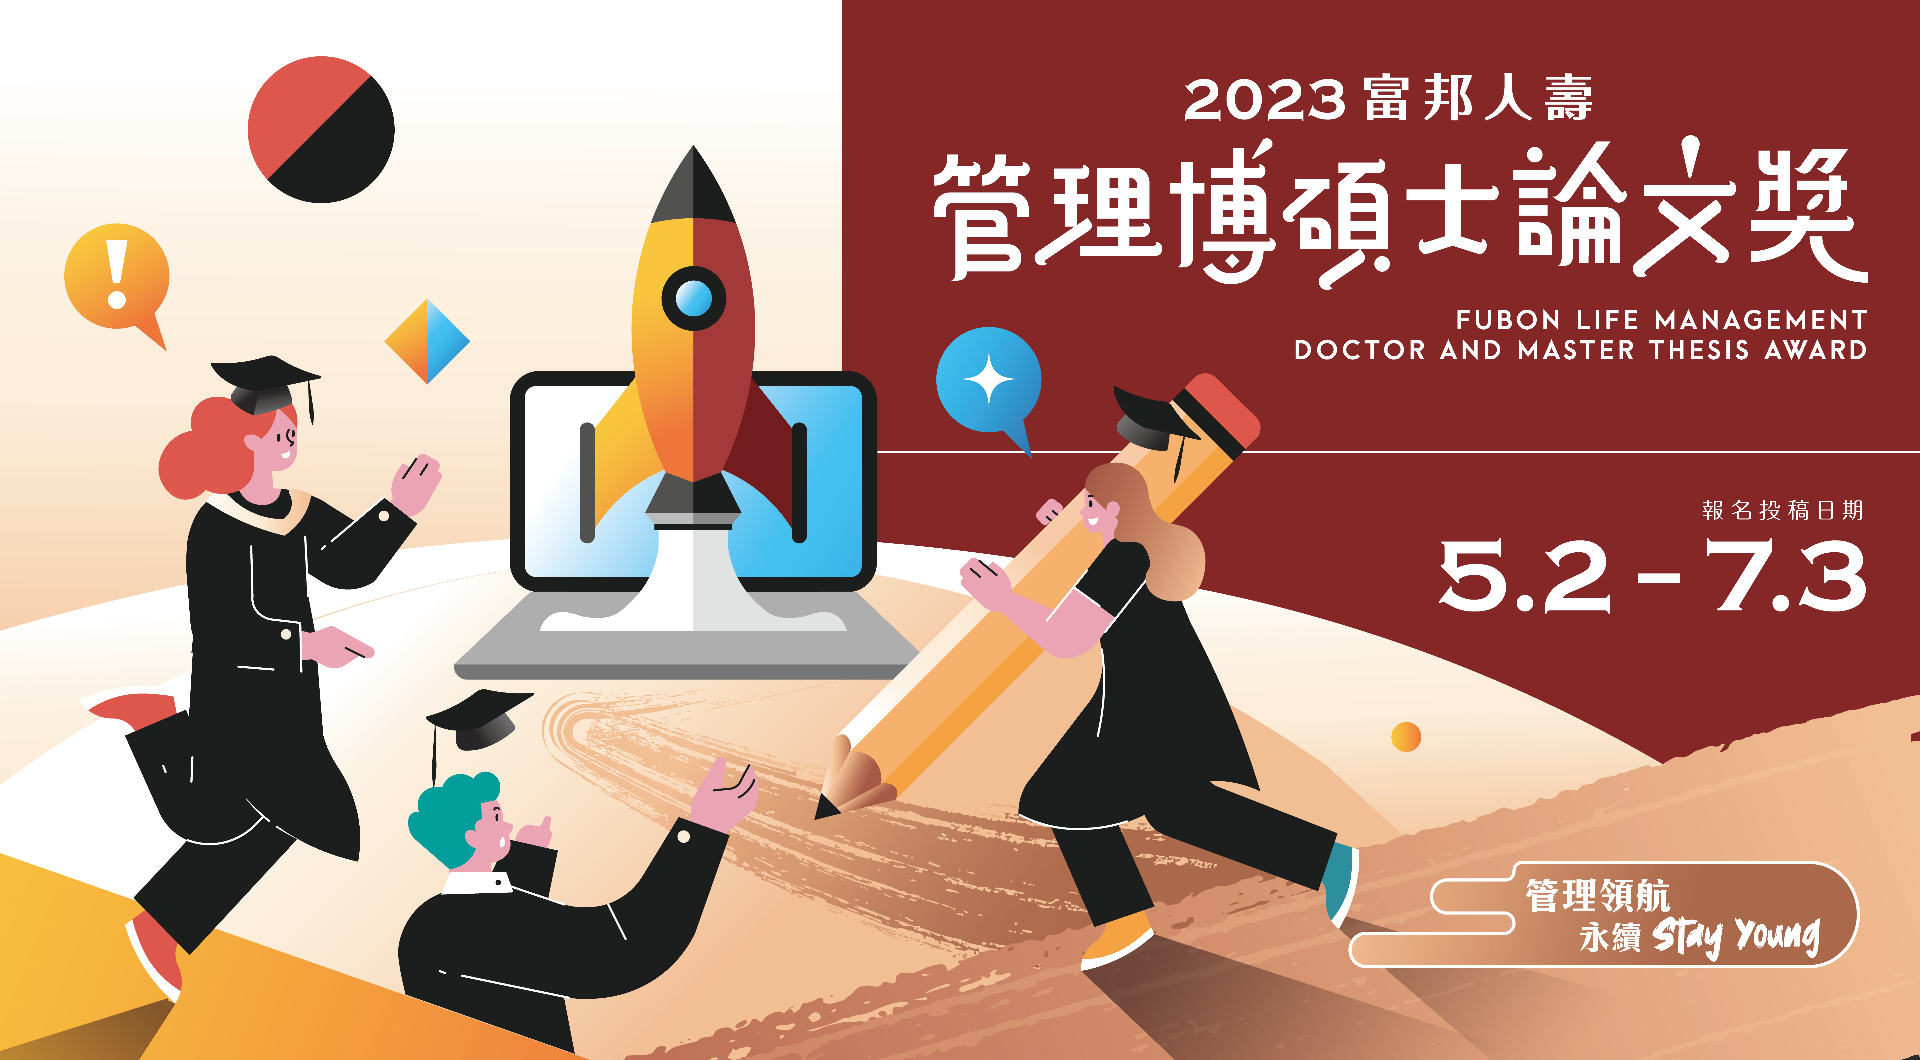 Featured image for “【2023富邦人壽管理博碩士論文獎】公告”